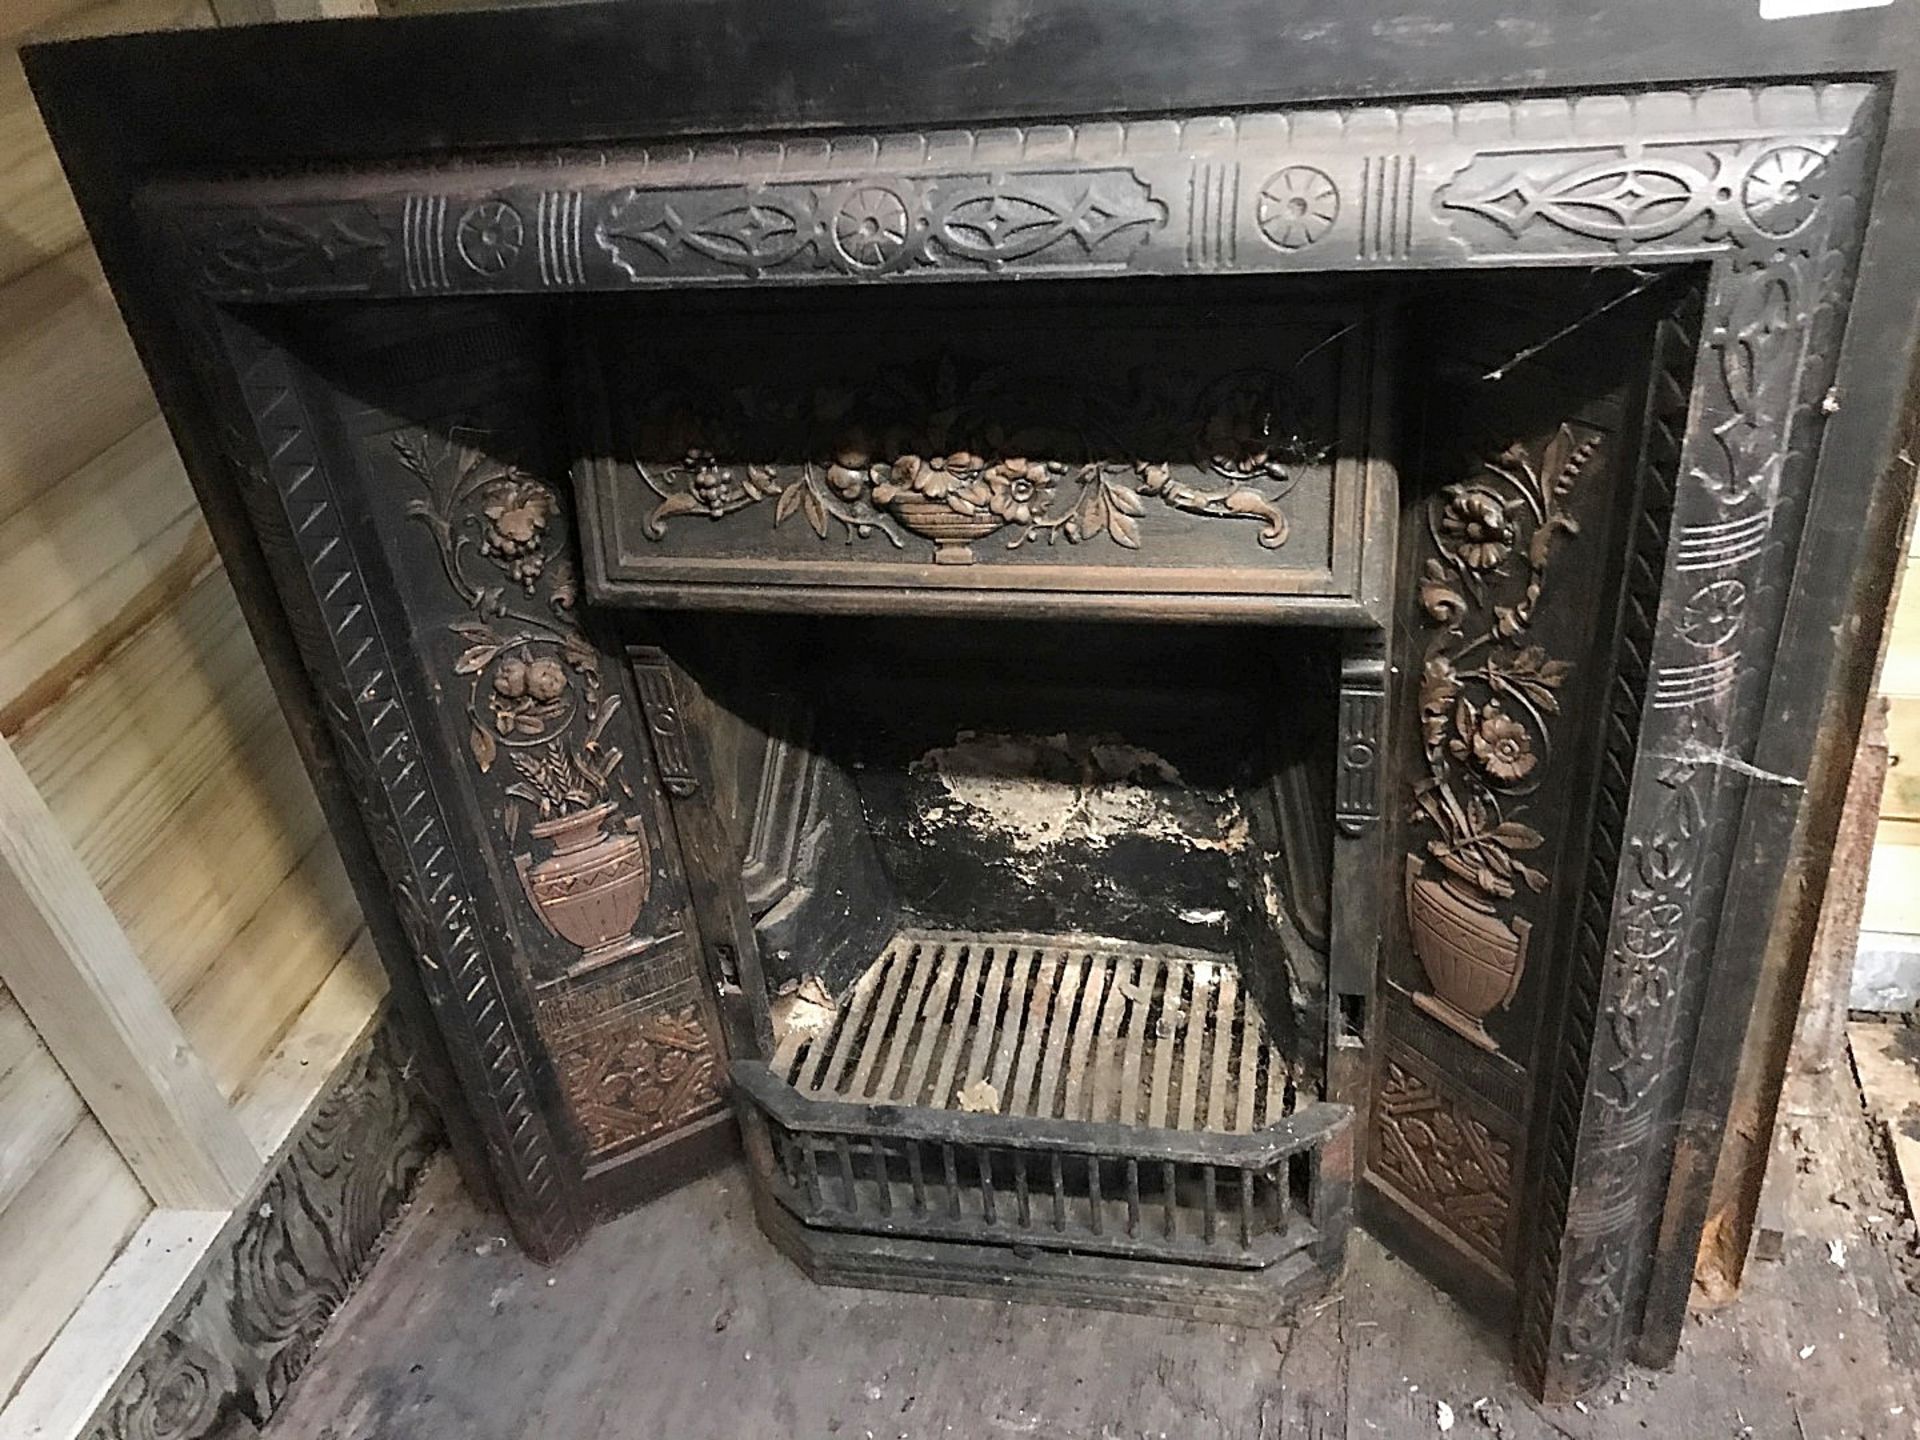 1 x Ultra Rare Stunning Antique Victorian Cast Iron Fire Insert With Ornate Cast Iron Tiles To Side - Image 2 of 5